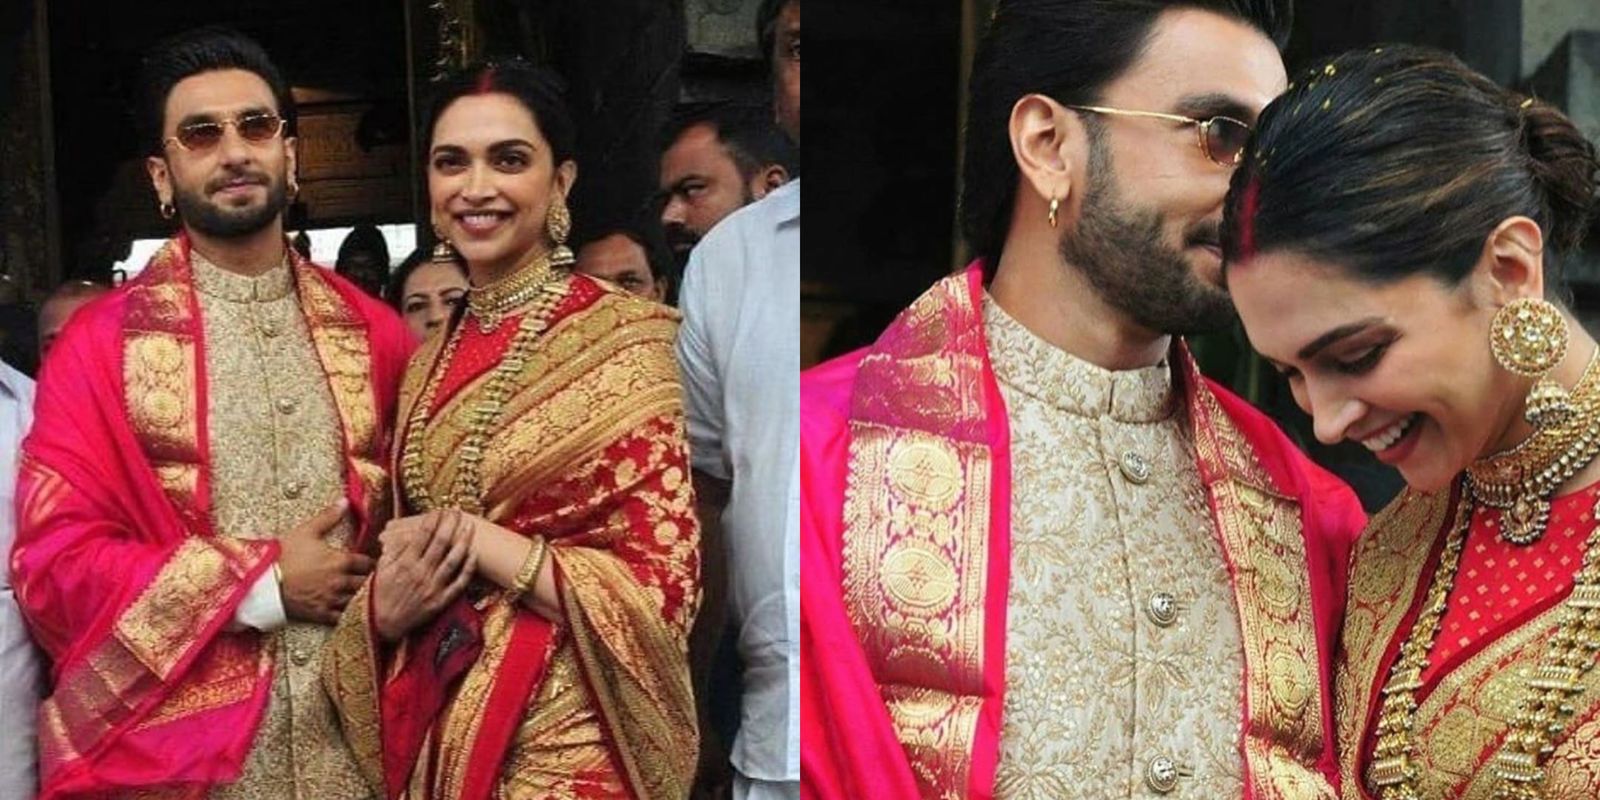 Deepika Padukone And Ranveer Singh Start Their Anniversary Celebrations With An Early Morning Visit To The Tirupati Temple